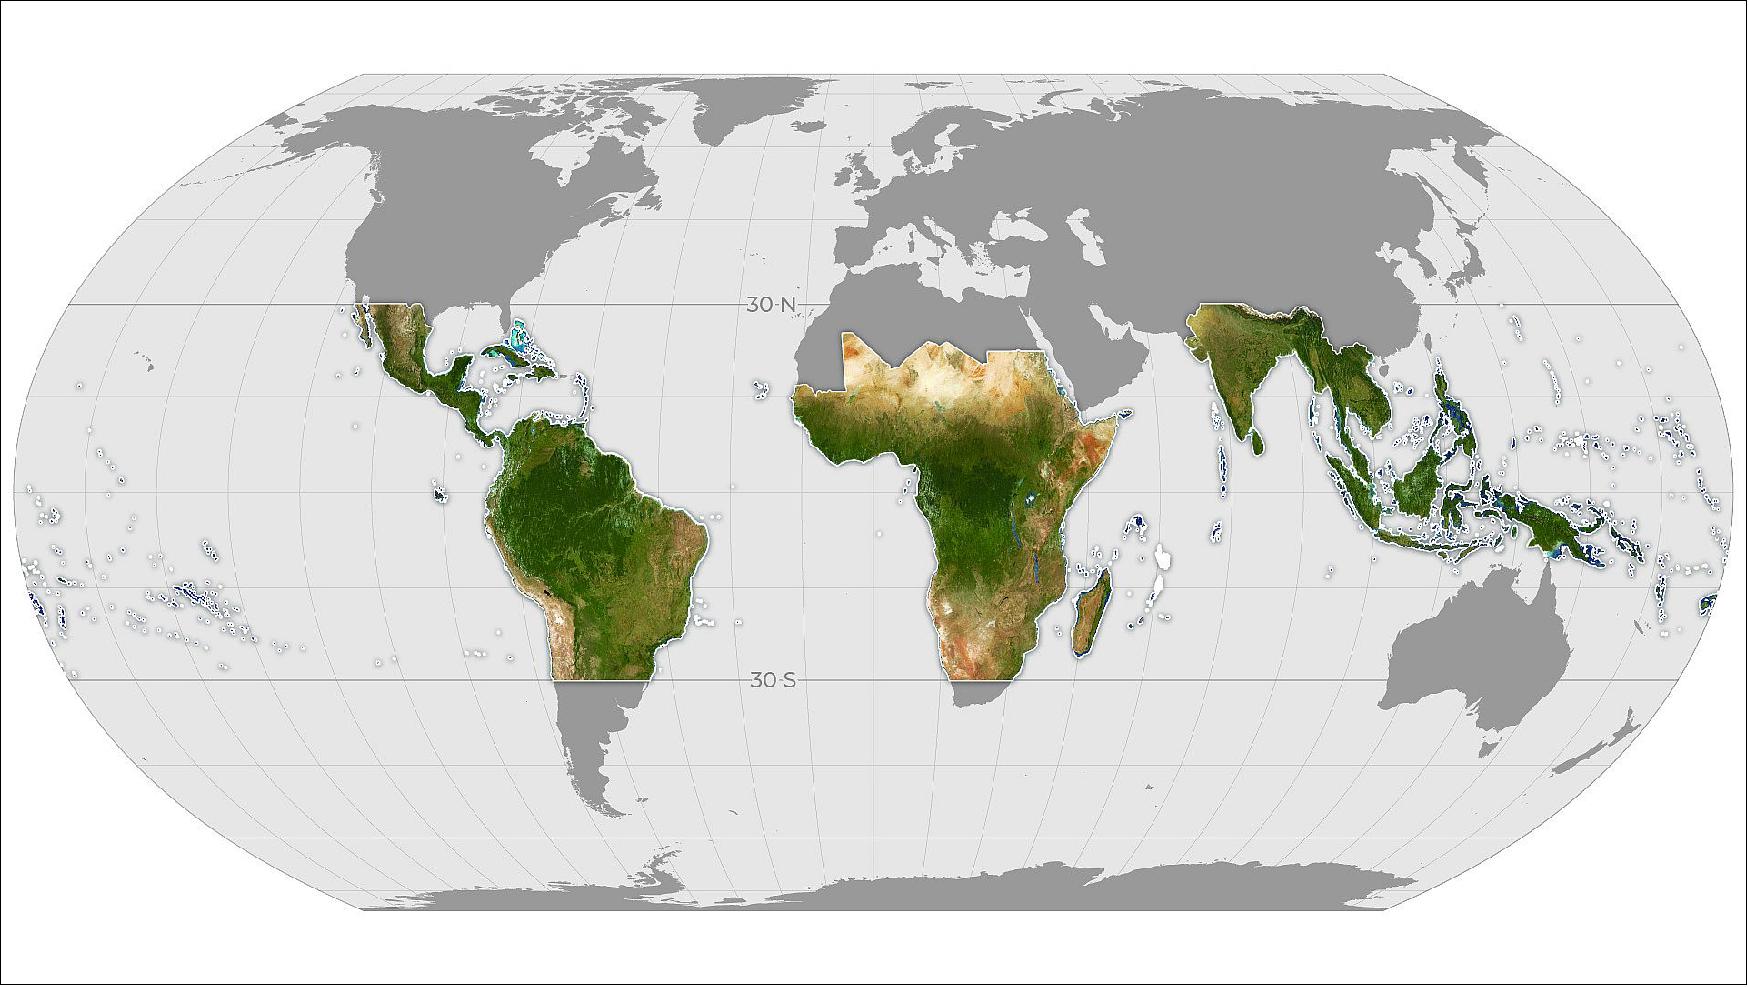 Figure 10: Global map showing the extent of monthly Planet Basemaps to be provided through the partnership for tropical forest monitoring 2020 (image credit: Planet Labs Inc.)